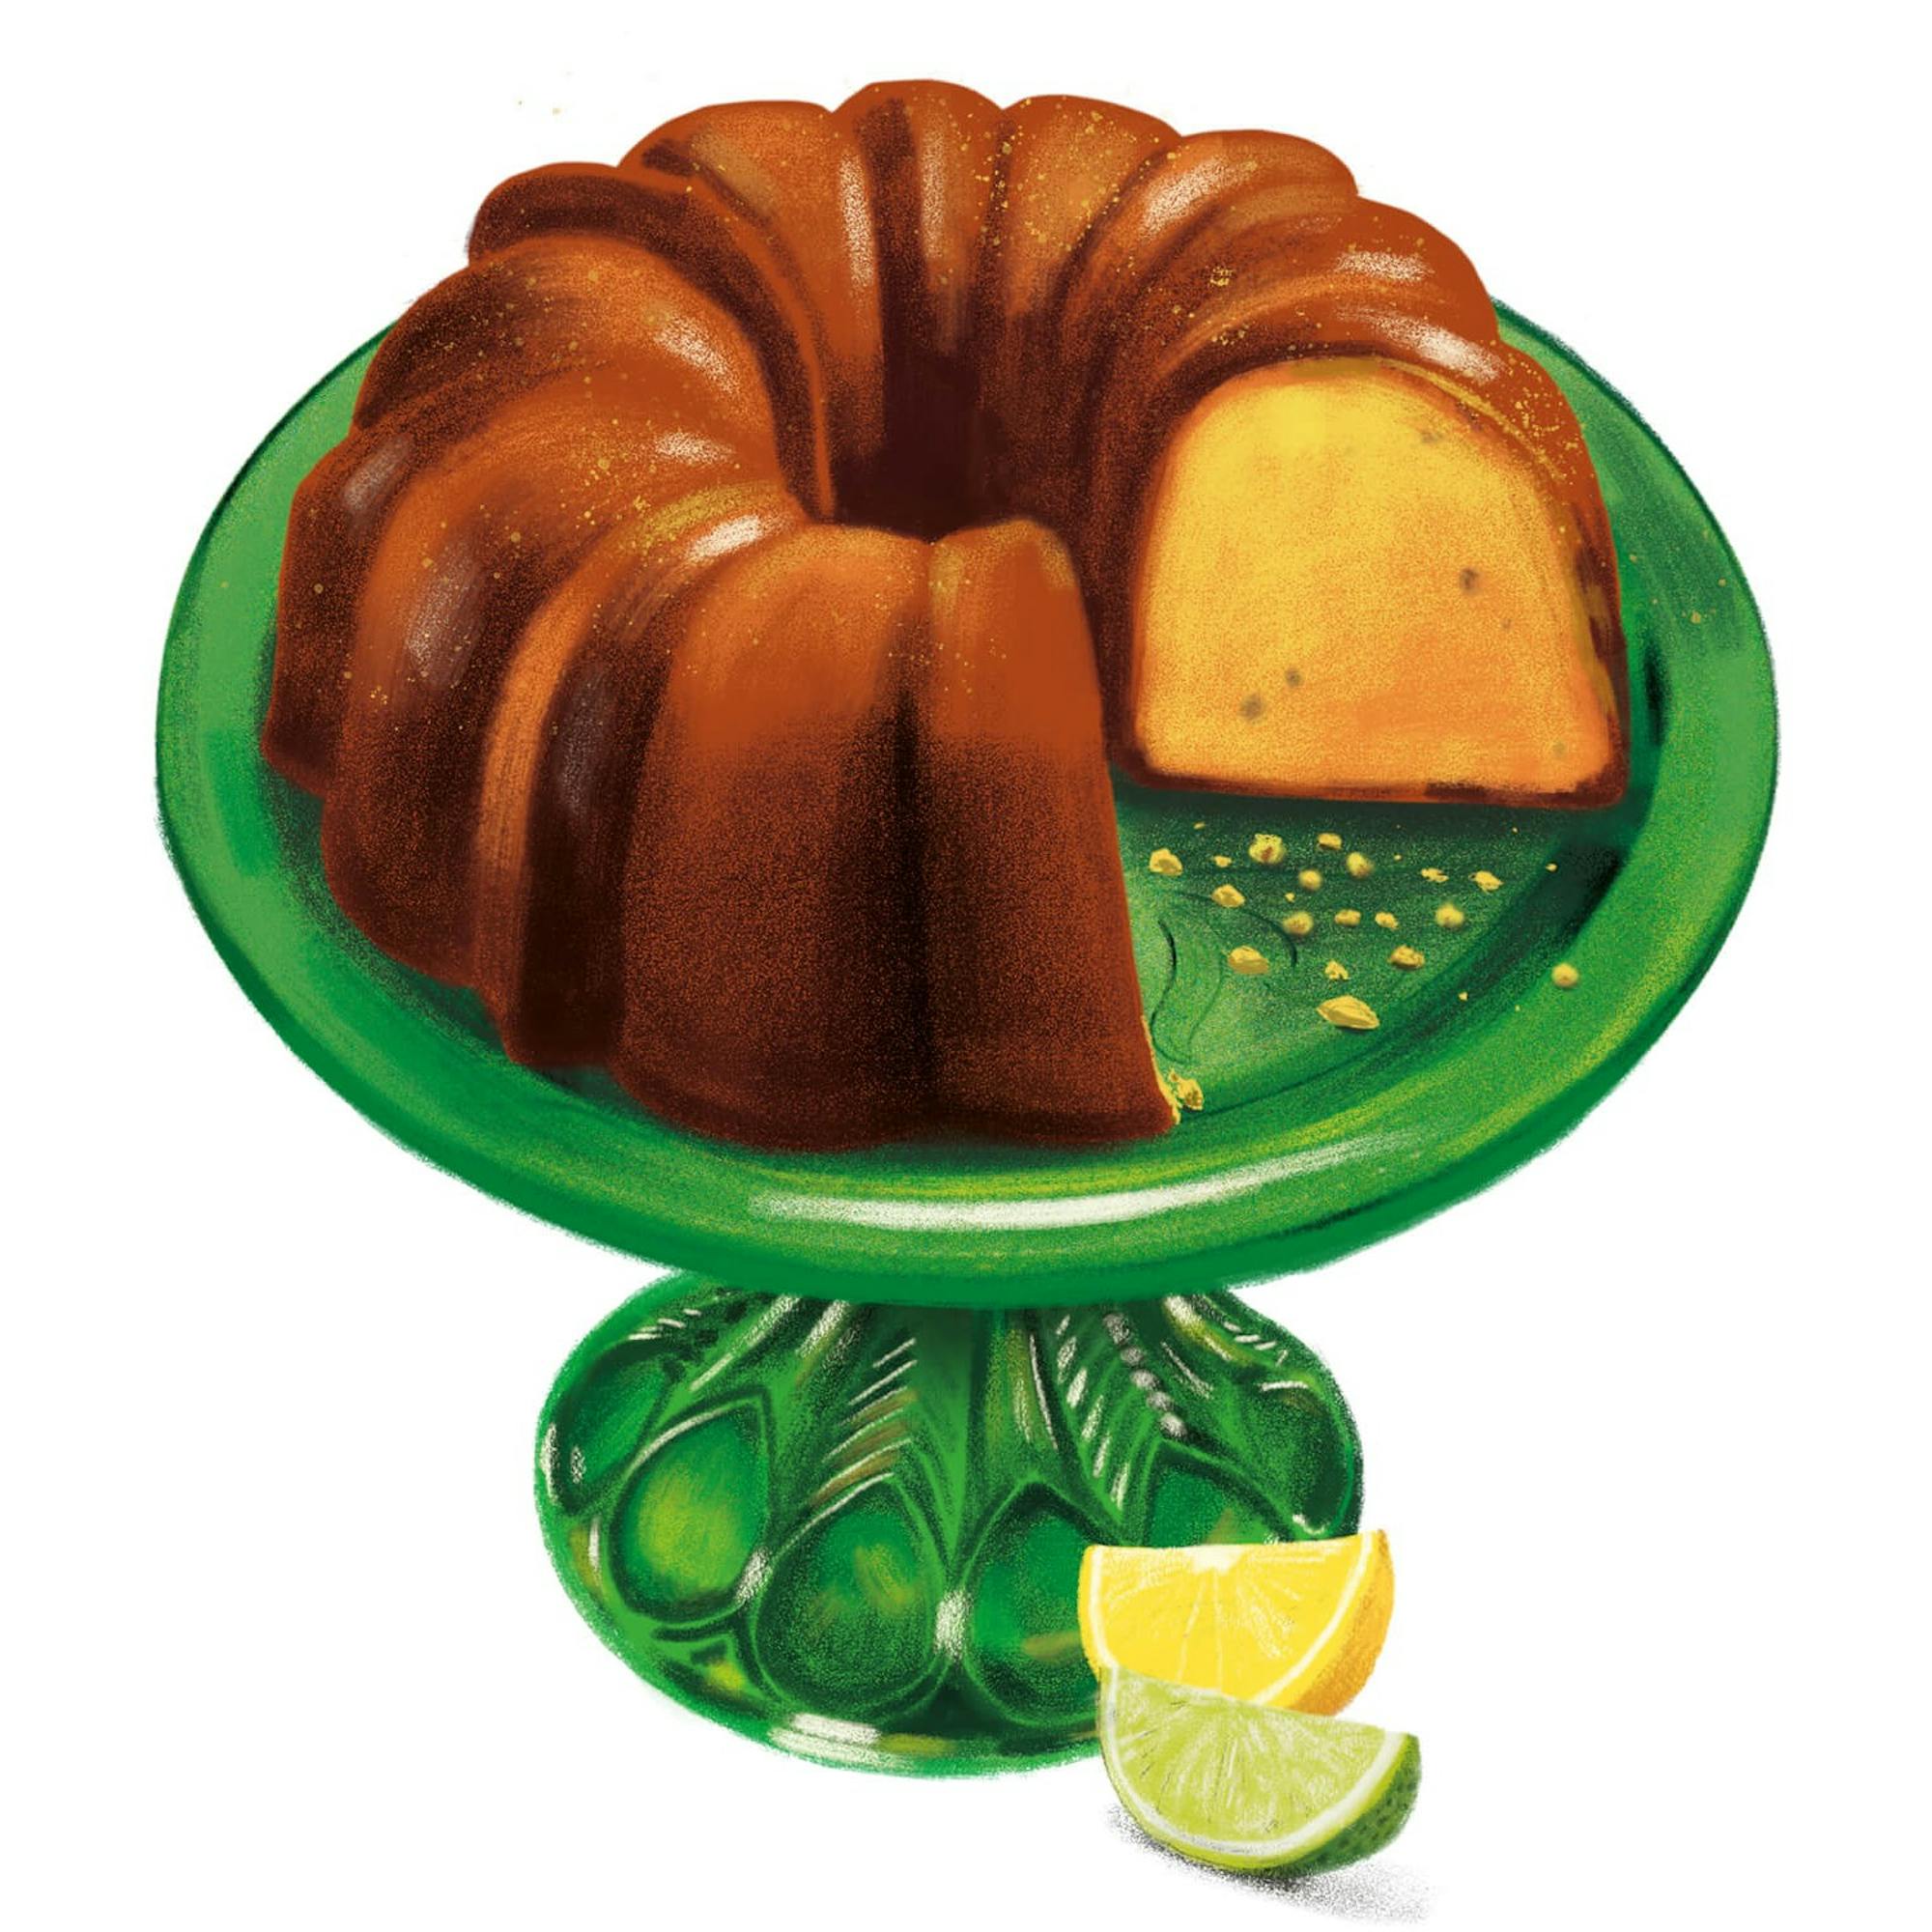 An image of the Satterfield Family 7Up Pound Cake. The delicious looking bundt cake rests on a green plate. There are some crumbs where a slice was taken.